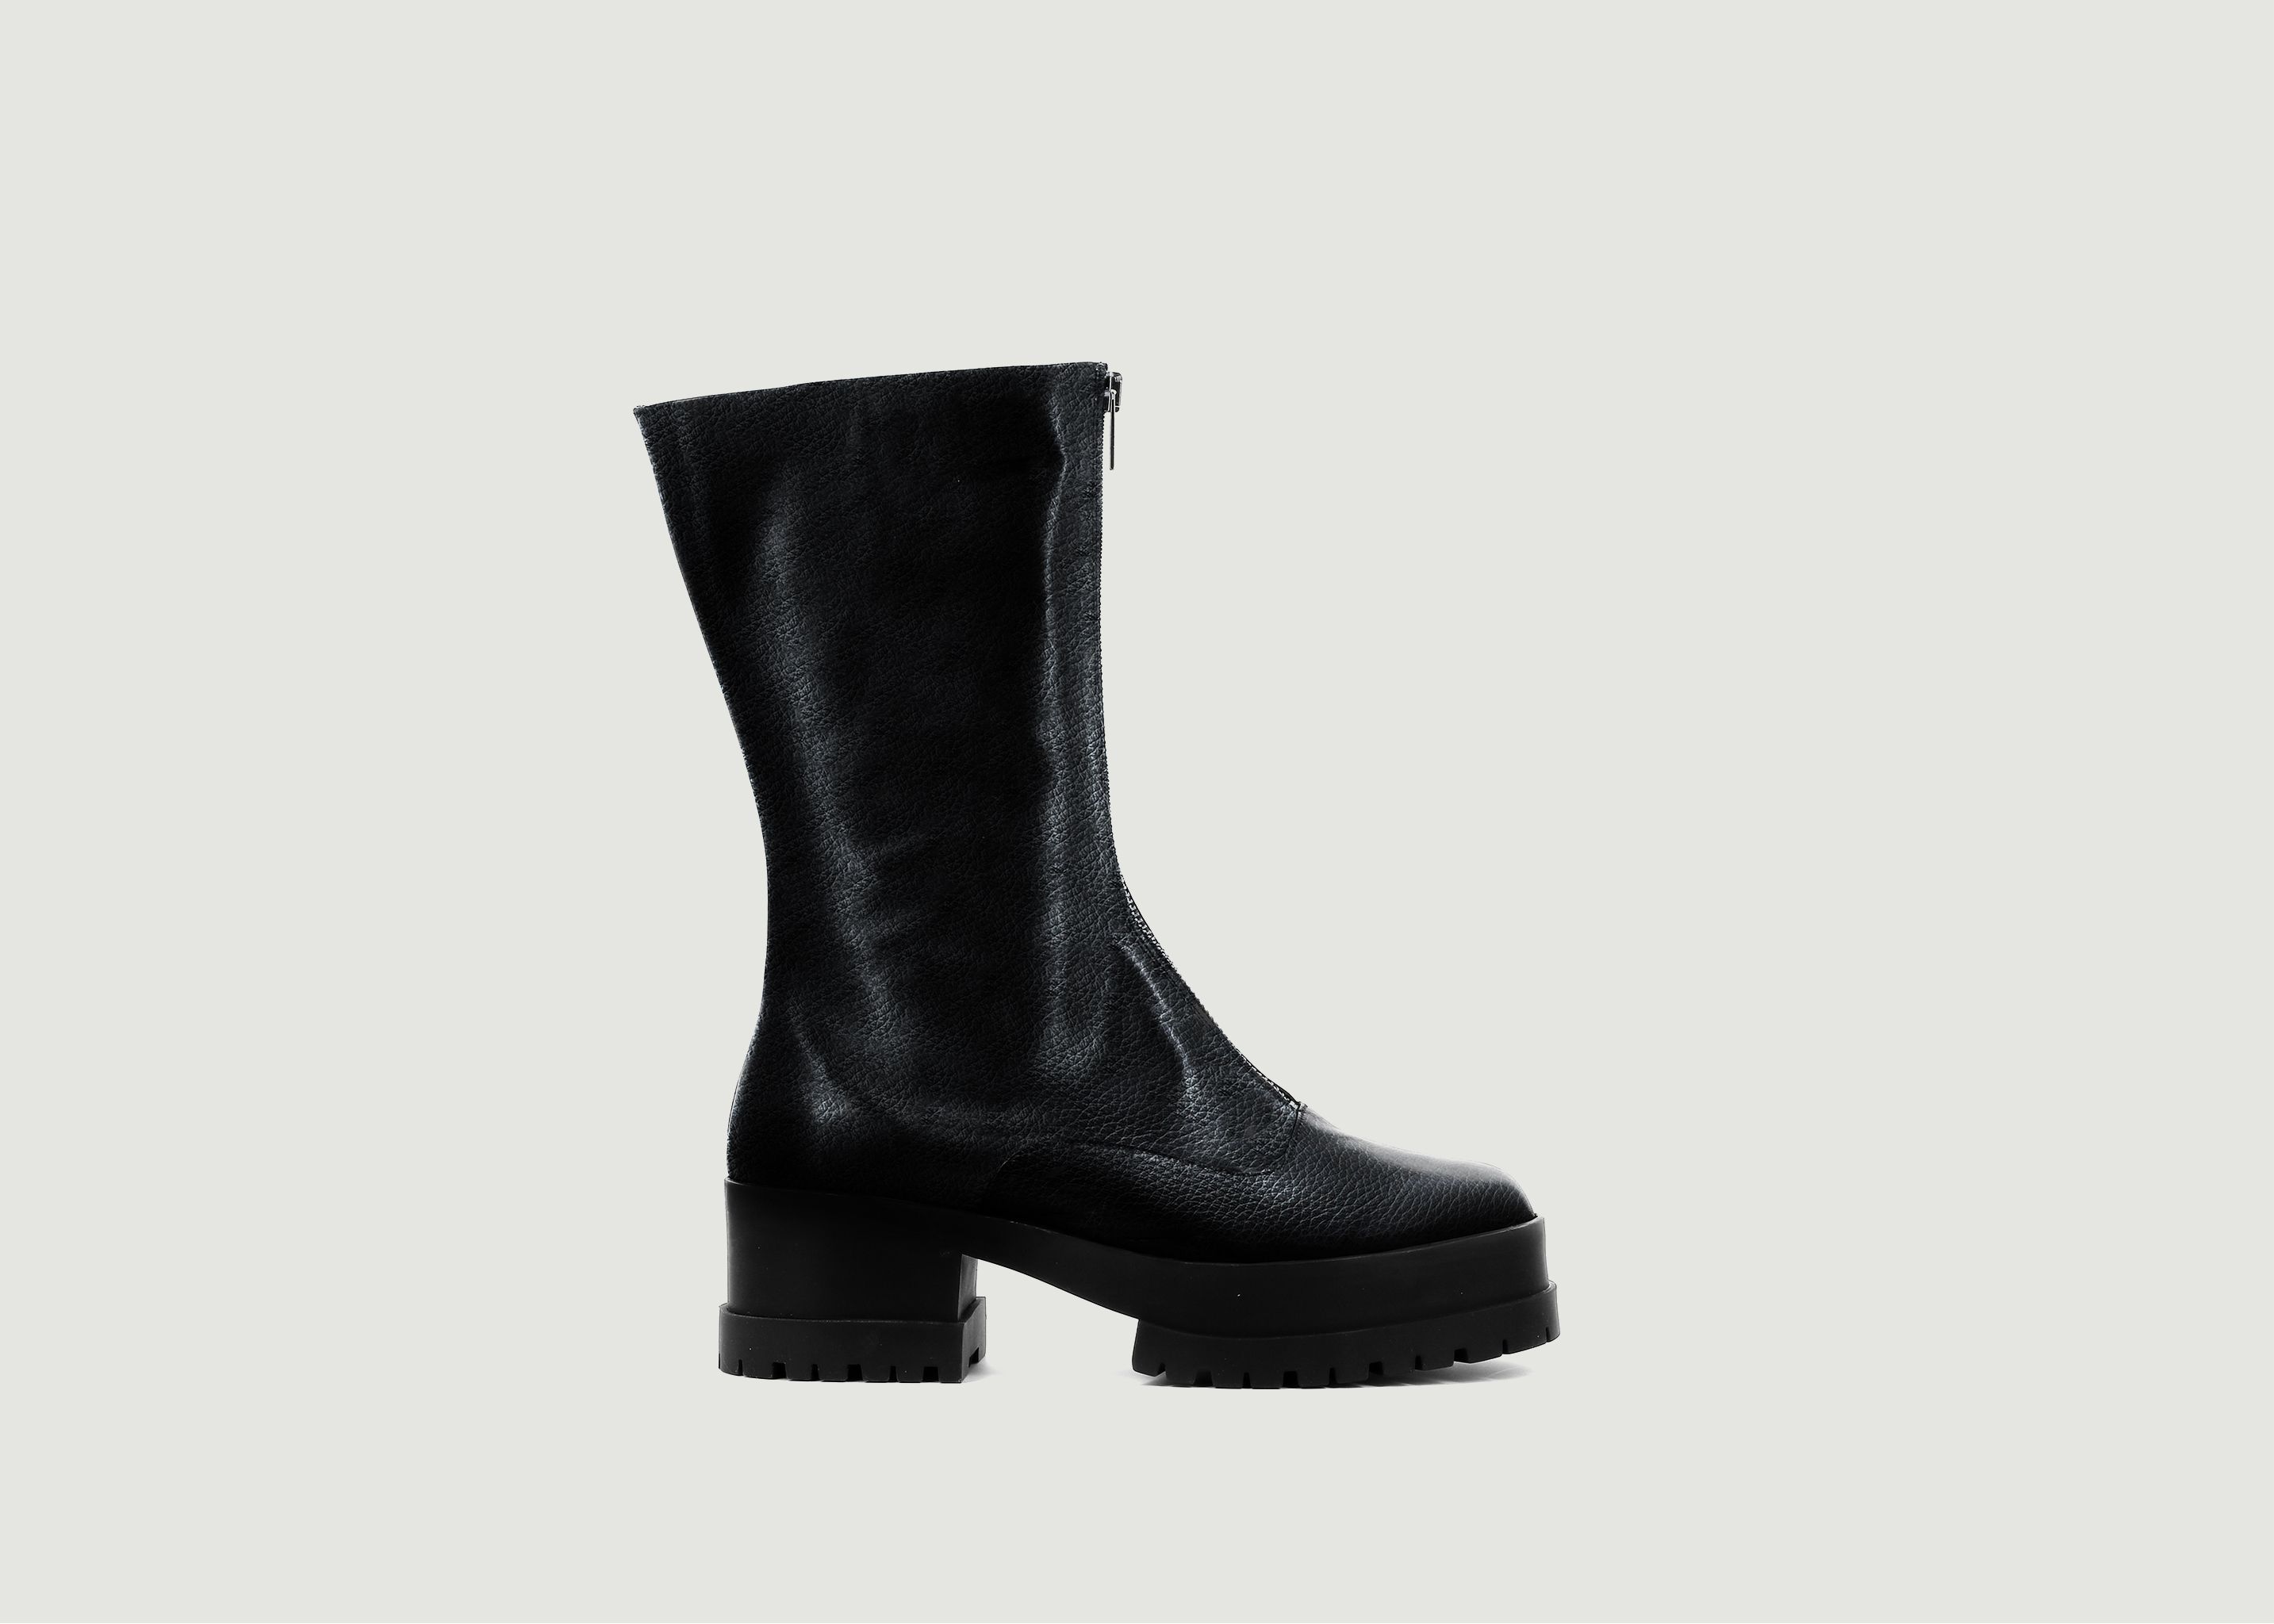 Wallace boots - Clergerie